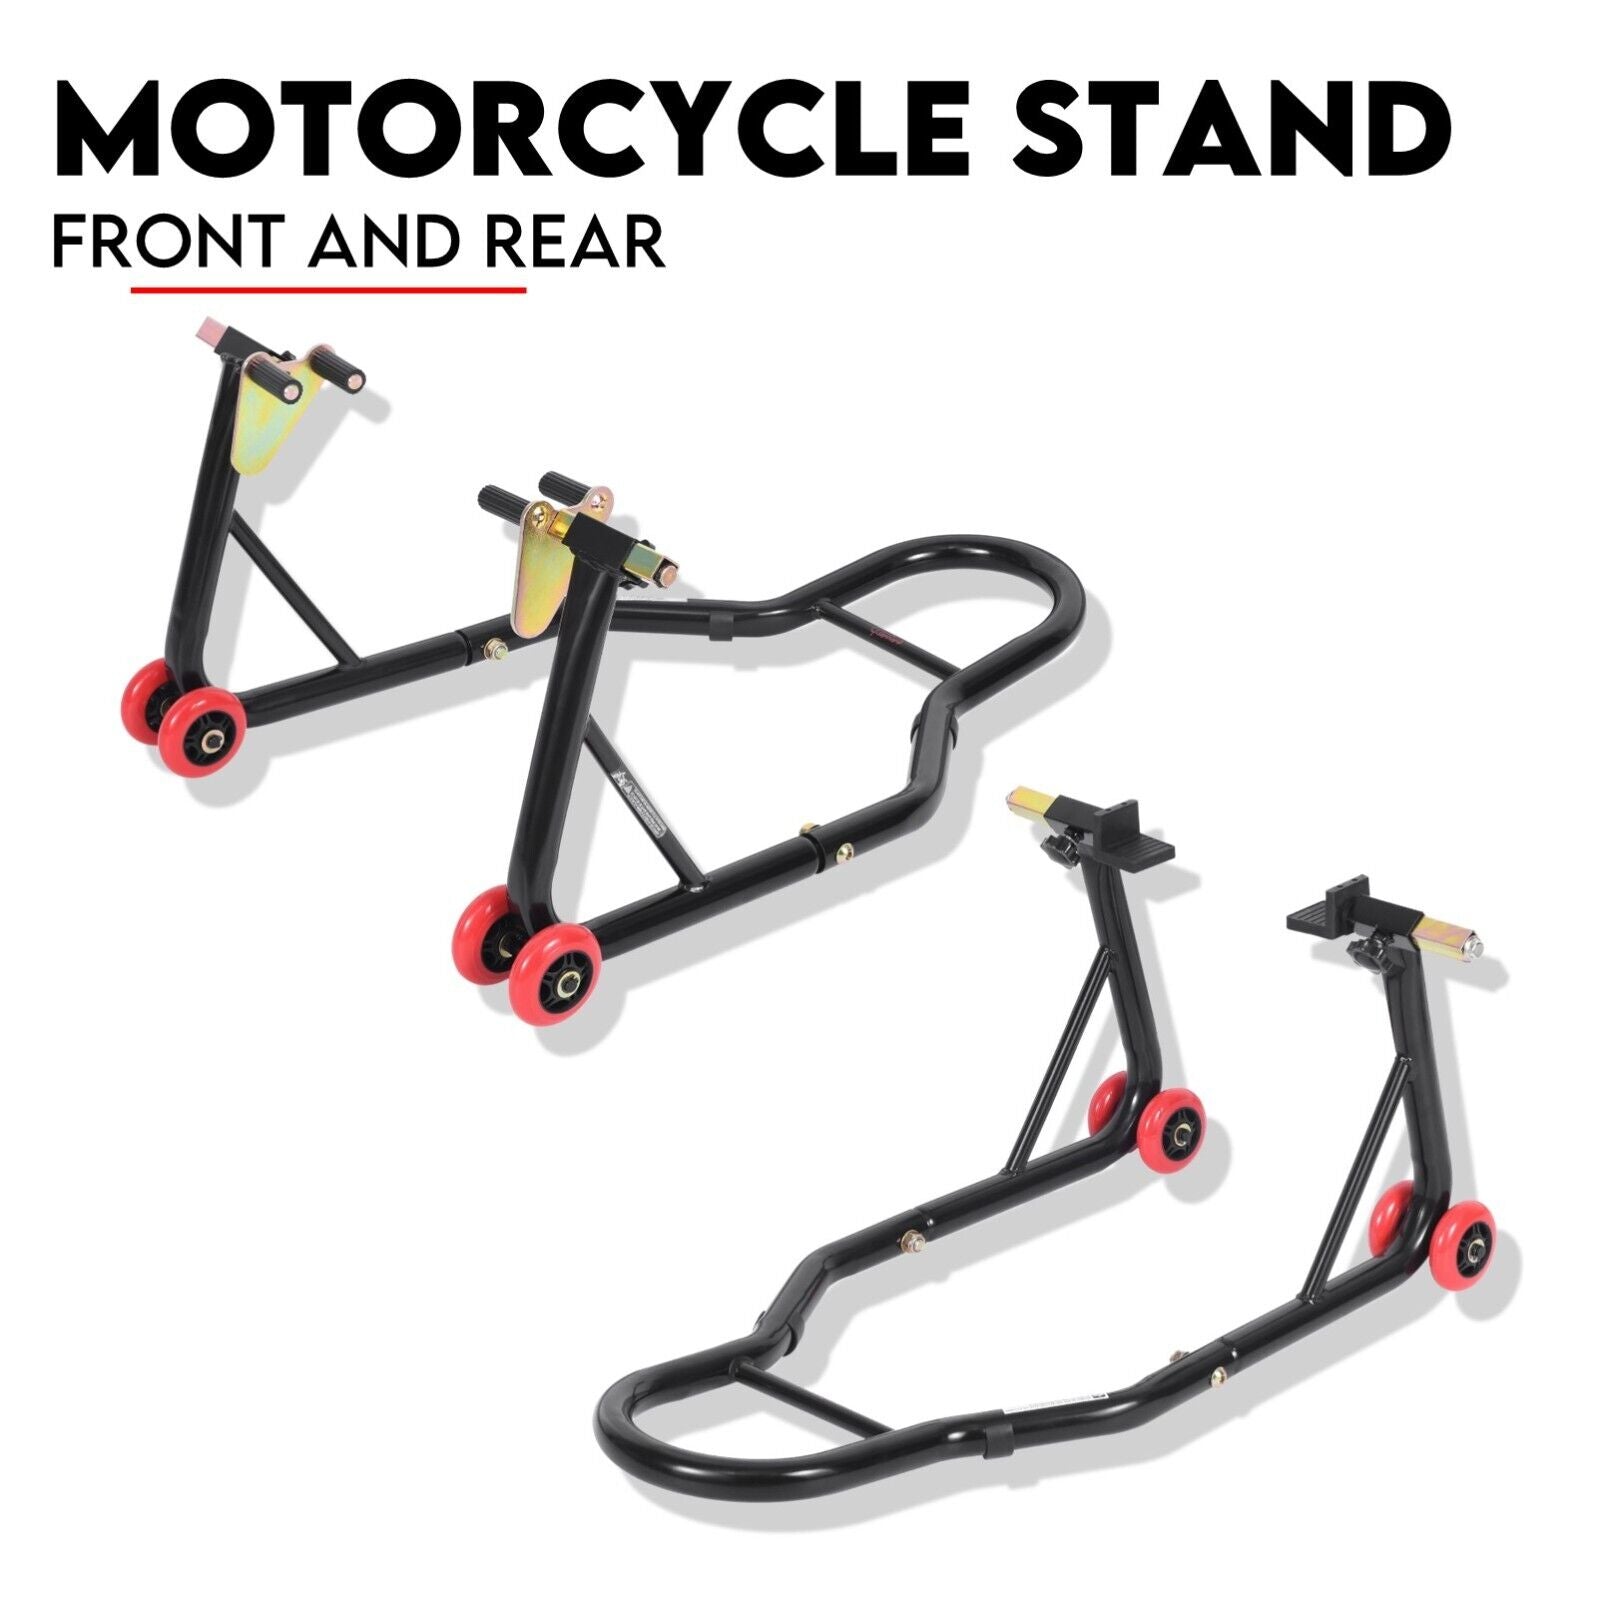 Motorcycle Stand Rear and Front - SILBERSHELL